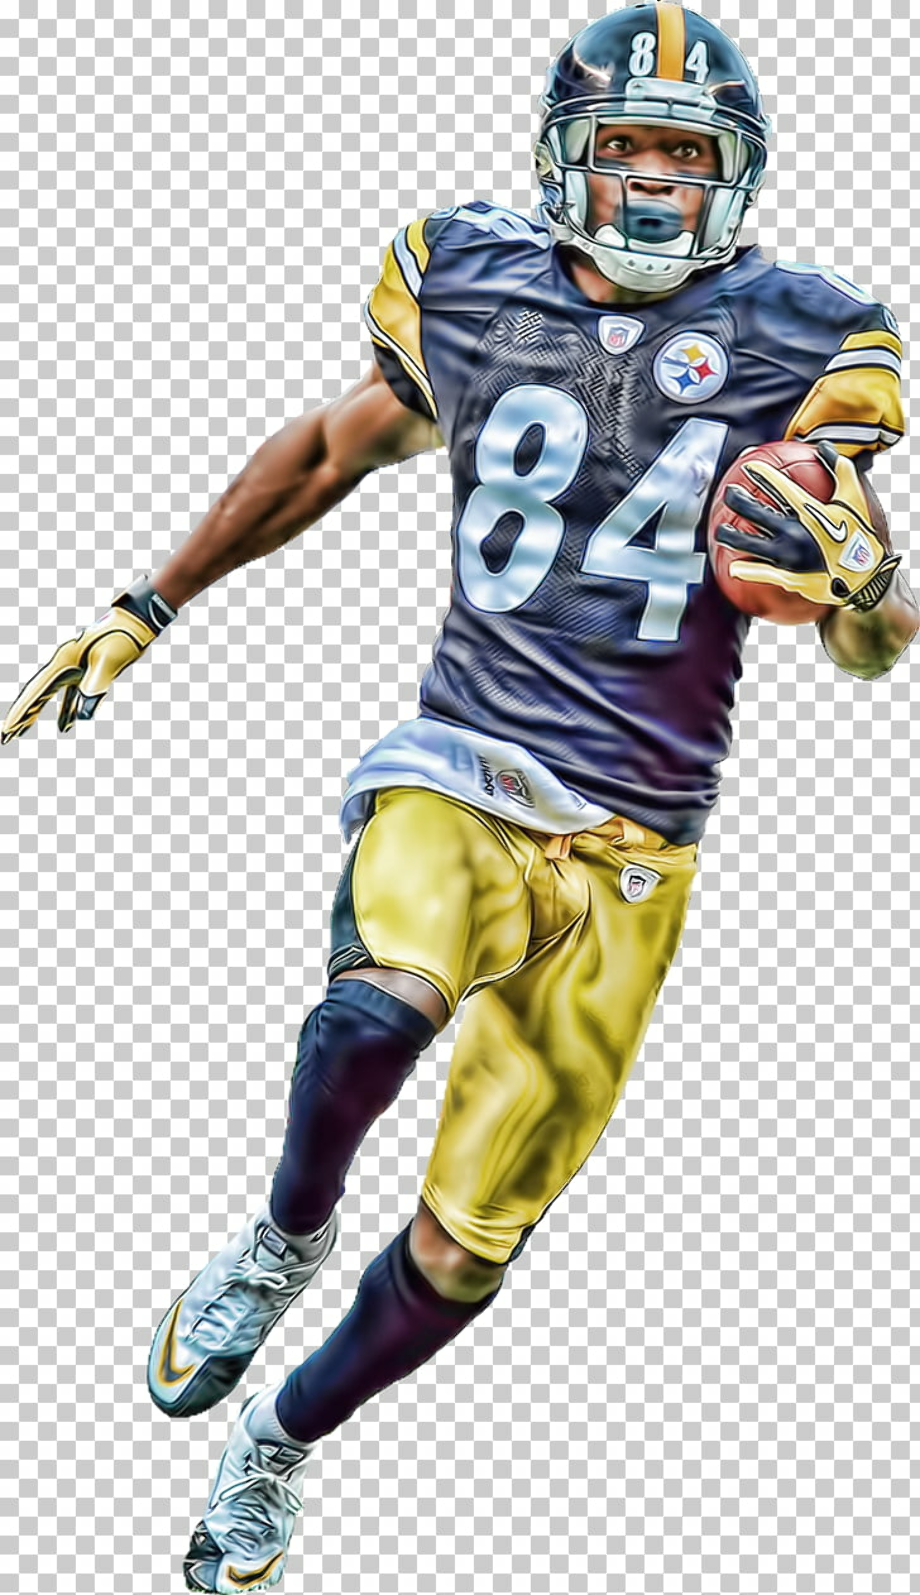 Download High Quality football player clipart wide receiver Transparent